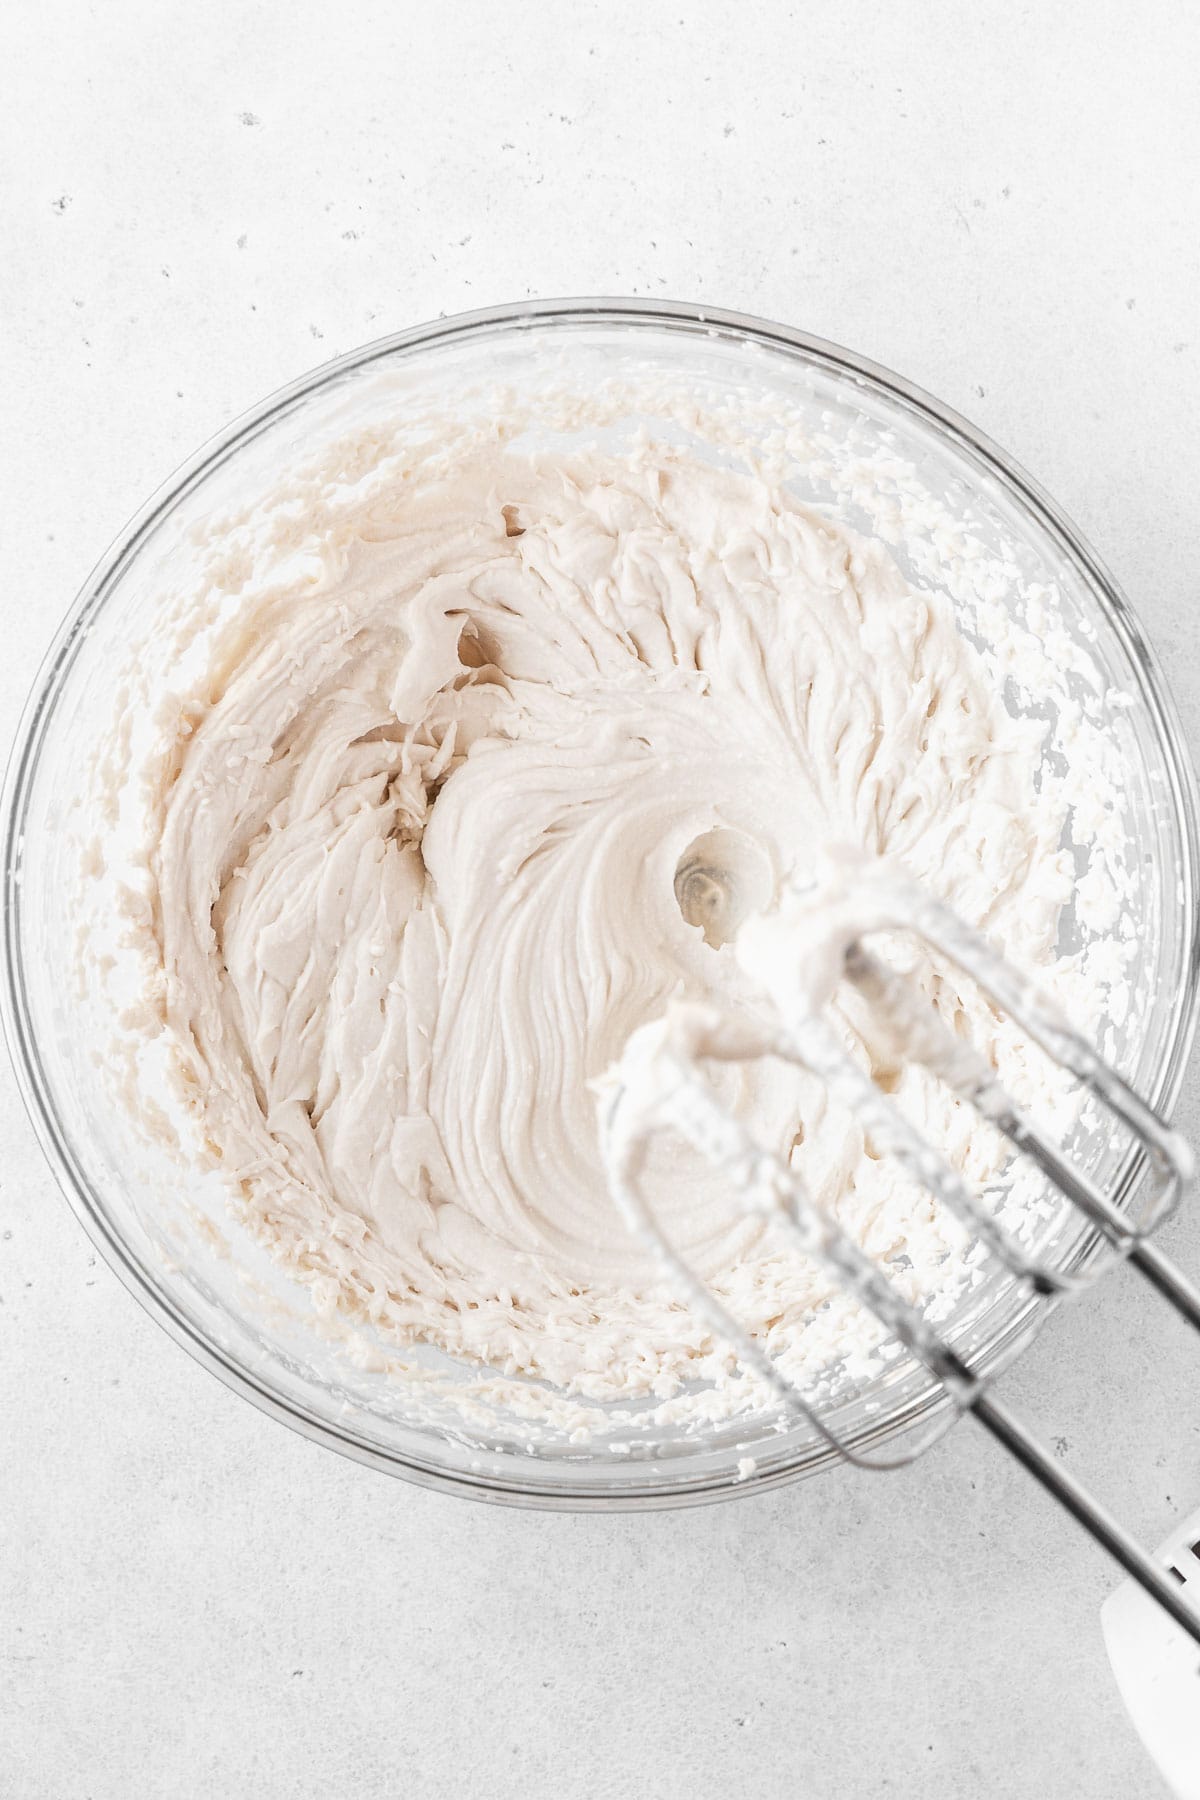 Whipping up oat milk whipping cream in a glass mixing bowl.